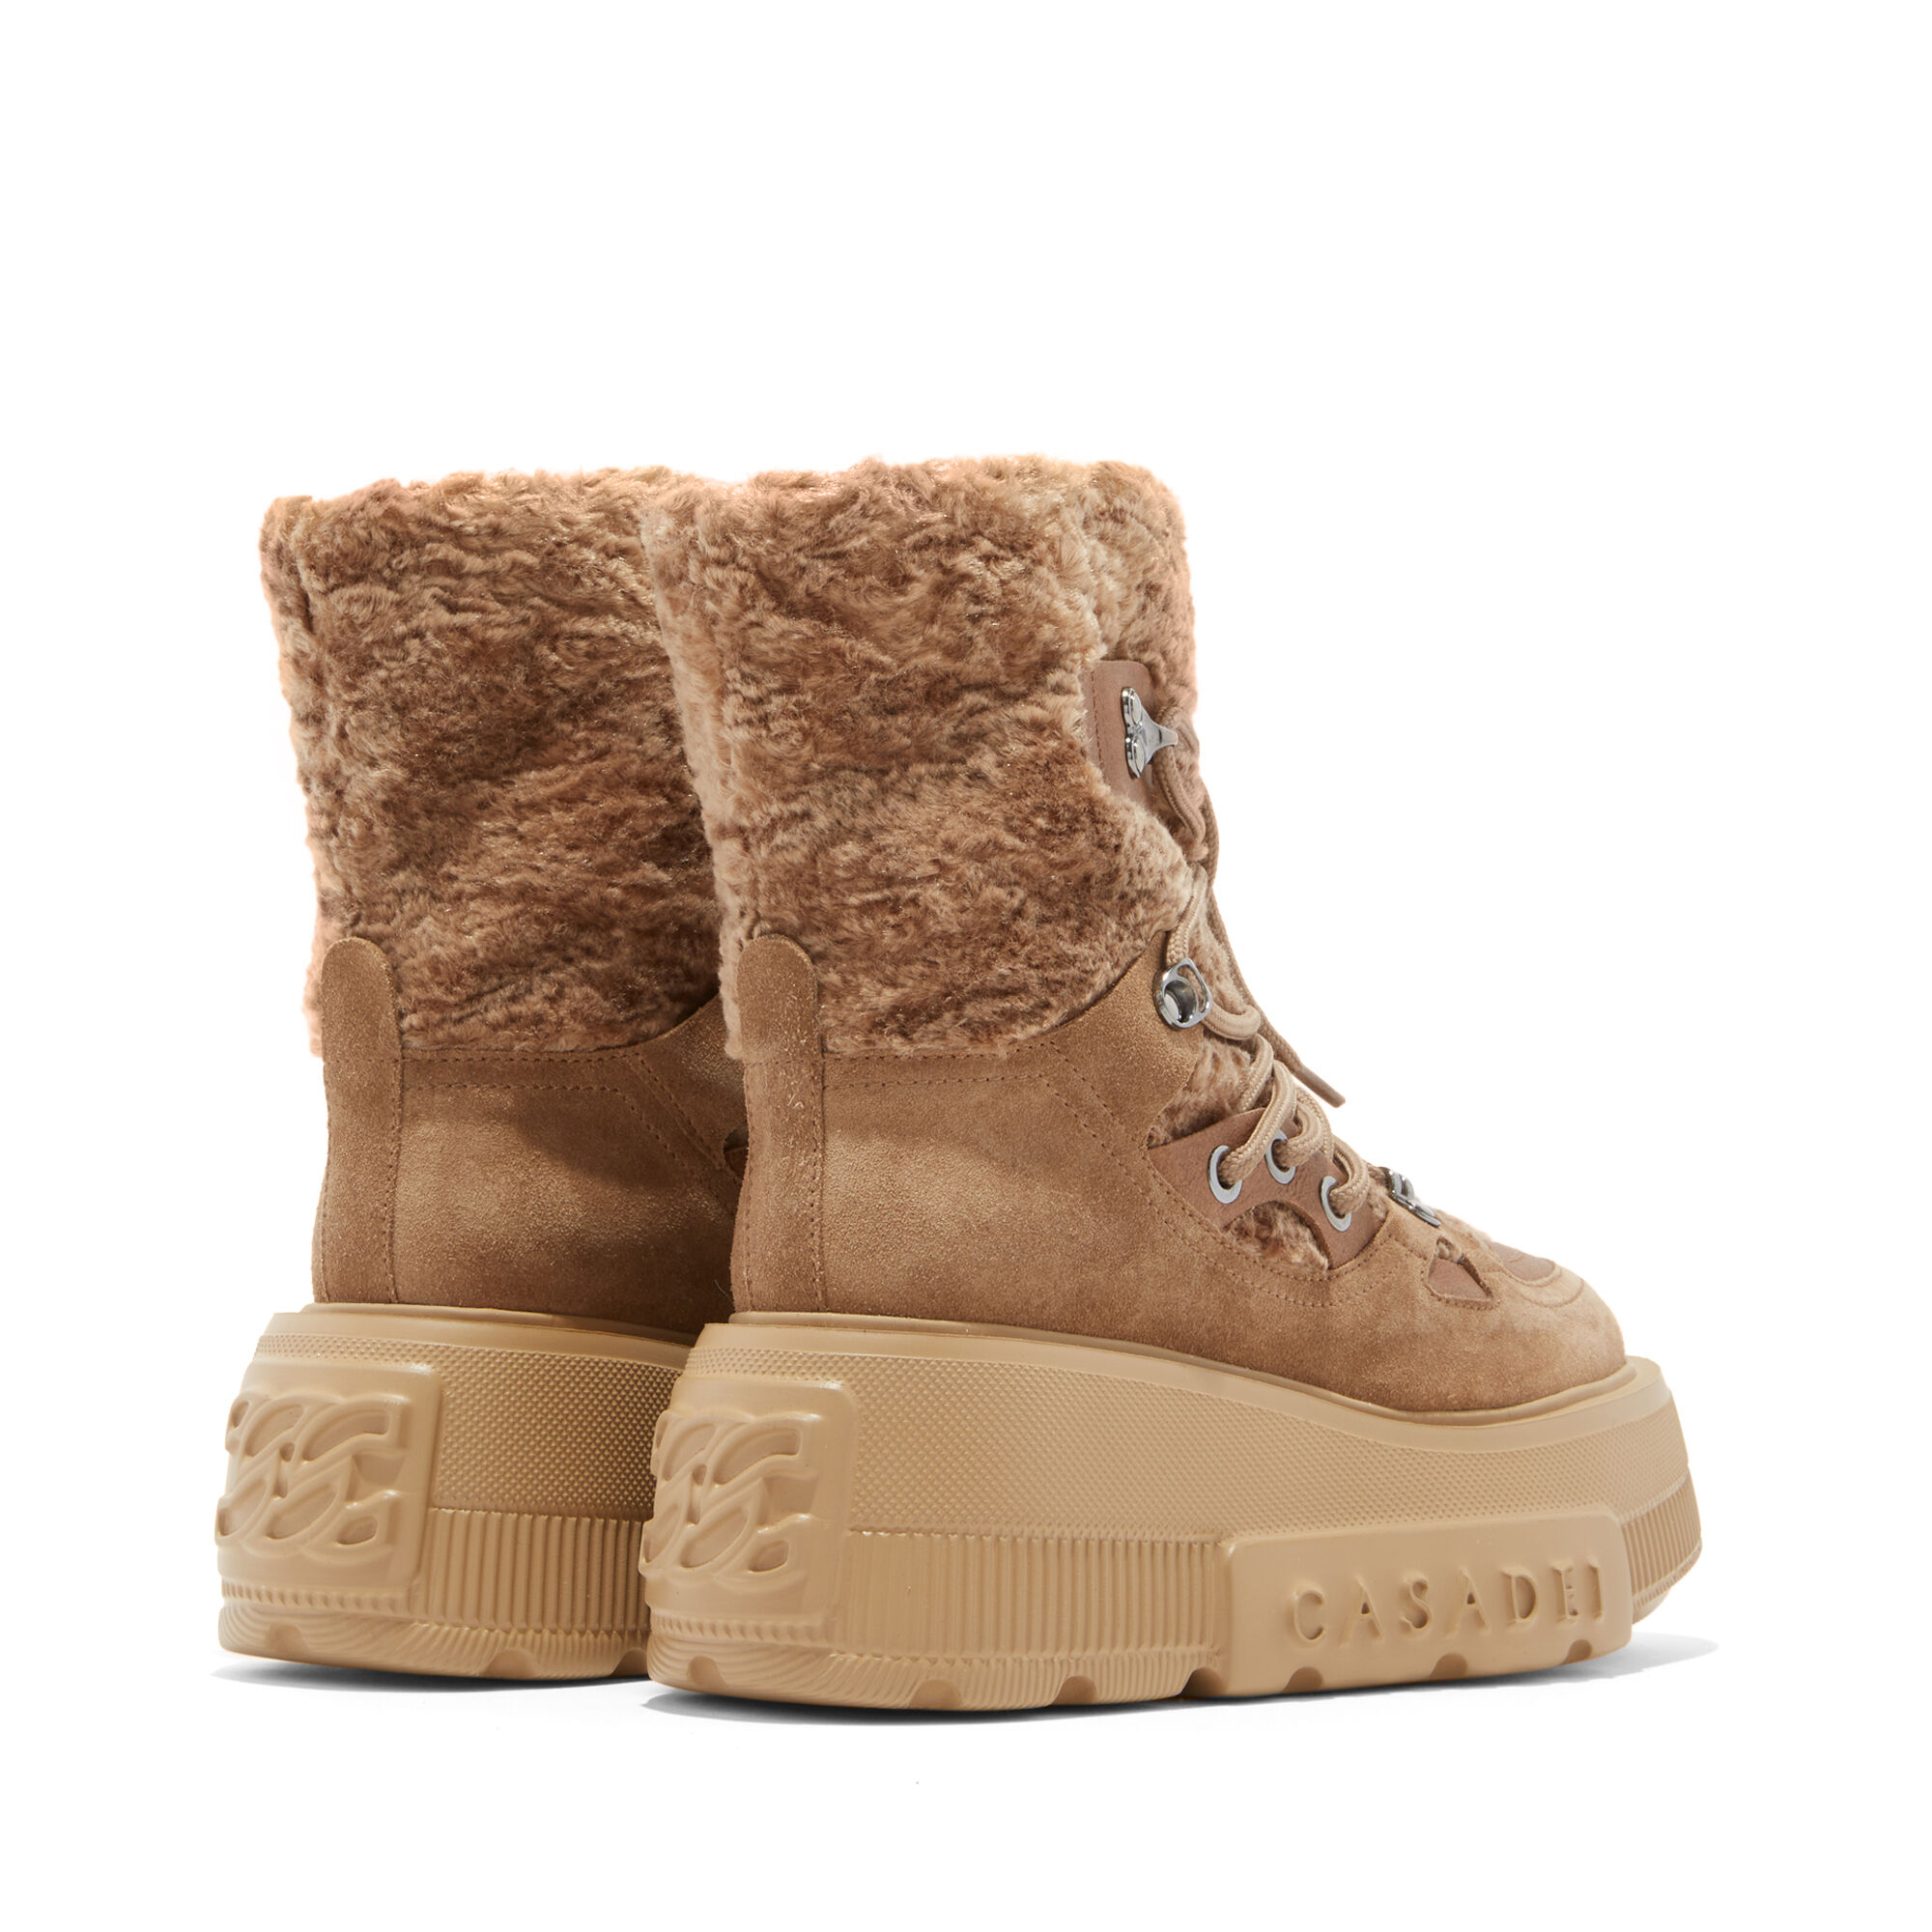 Casadei lace-up shearling boots - Brown